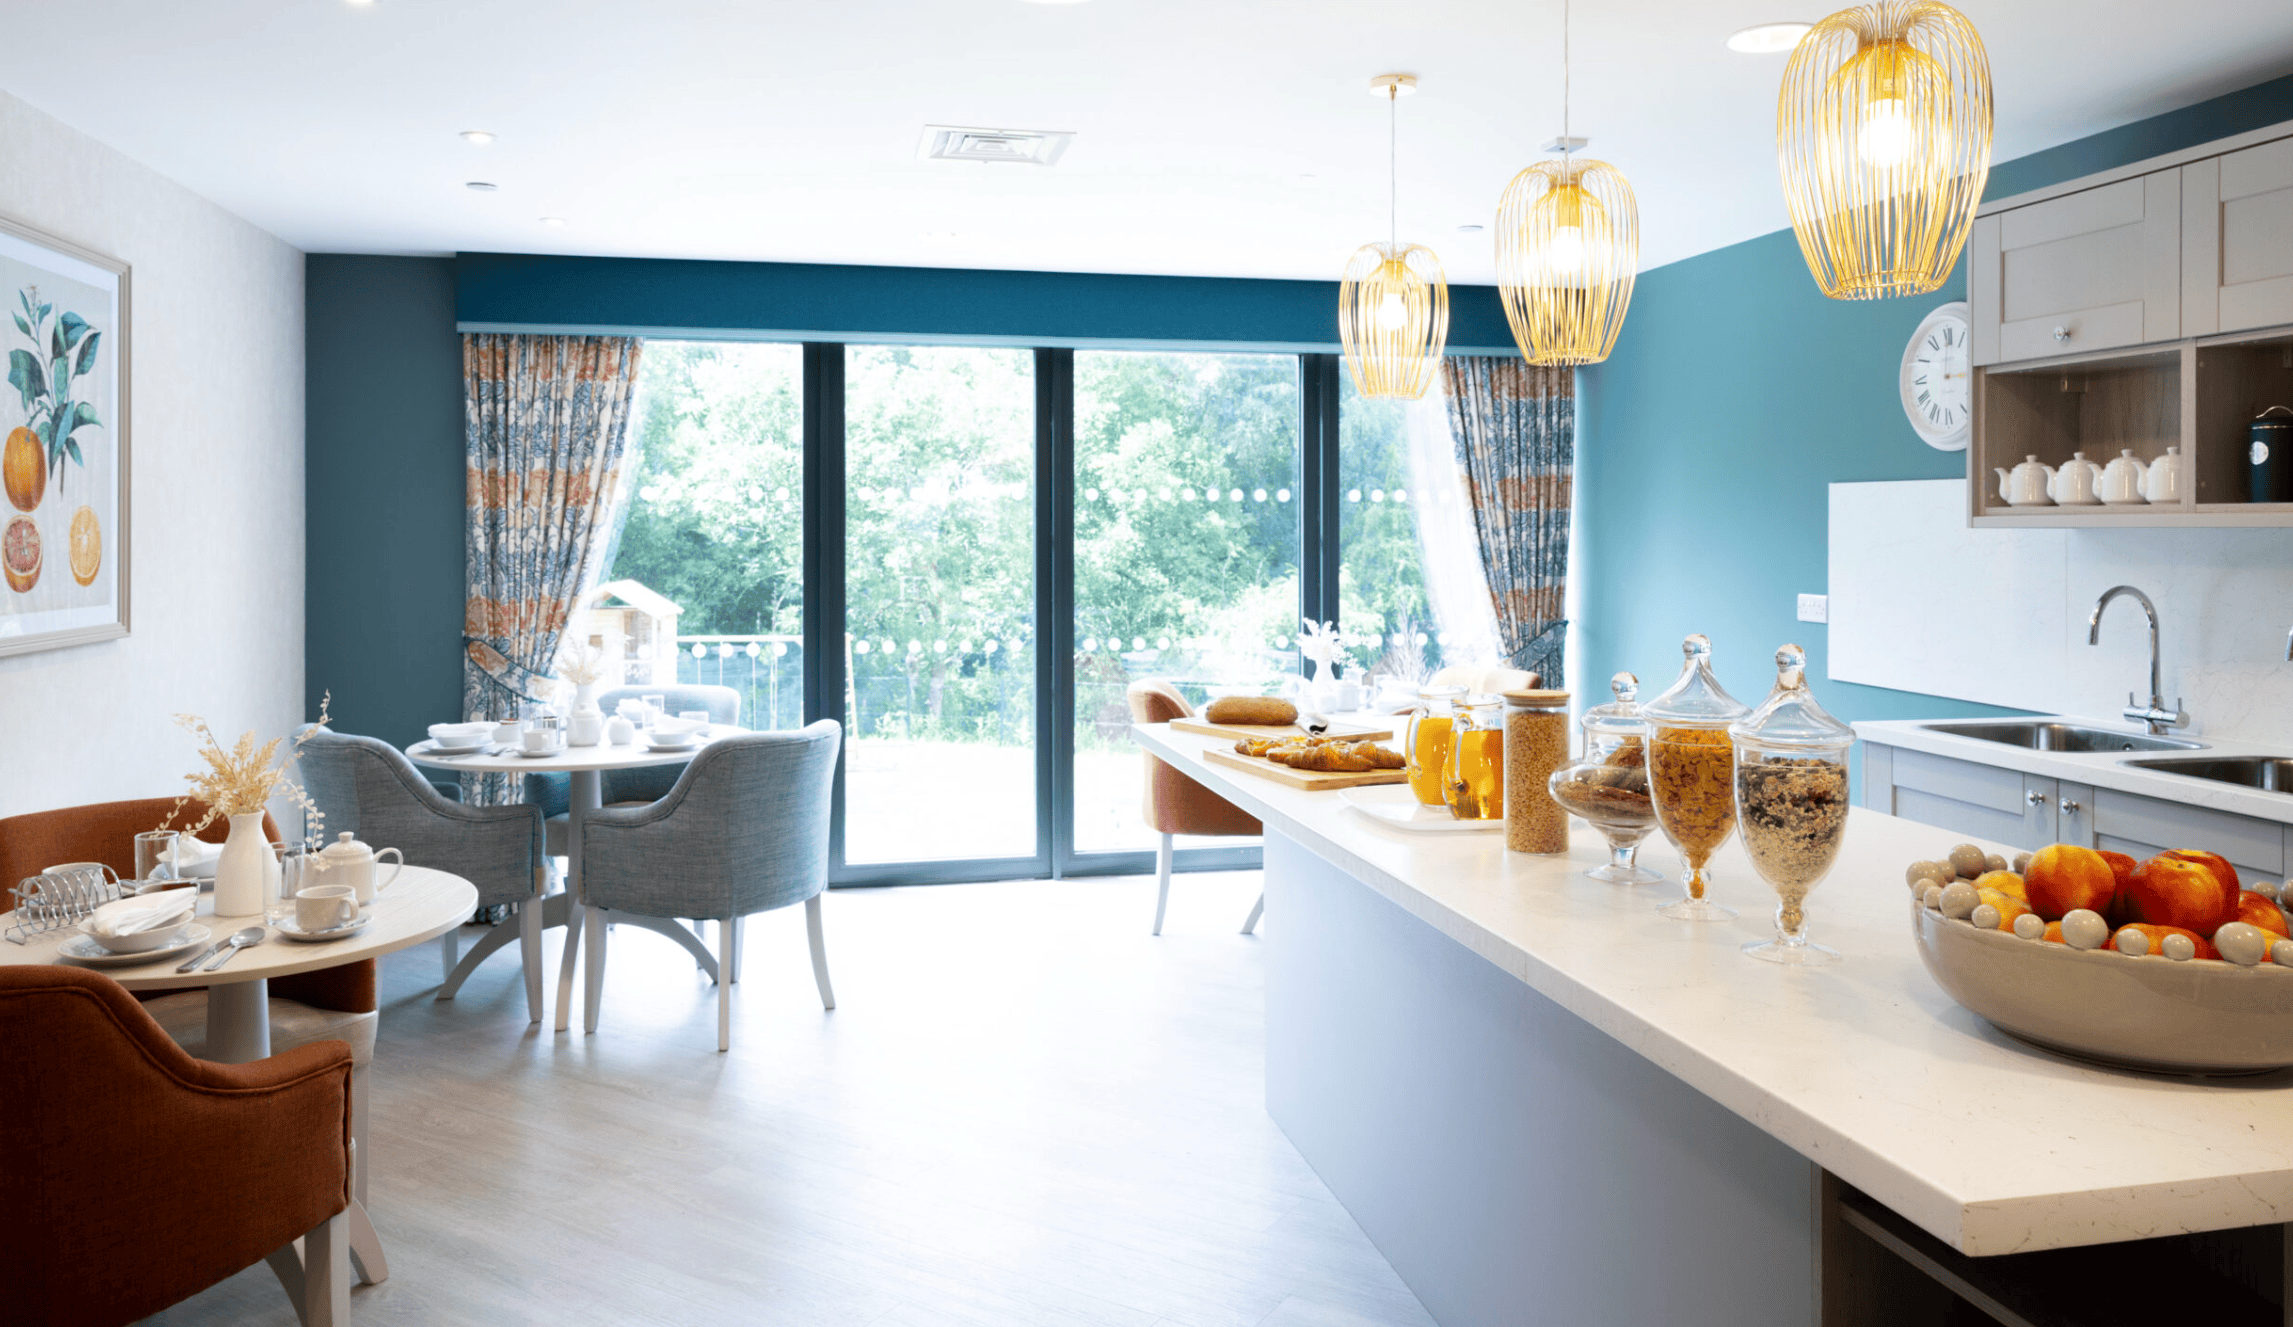 Dining/kitchen area of Mearns View care home in Glasgow, Scotland